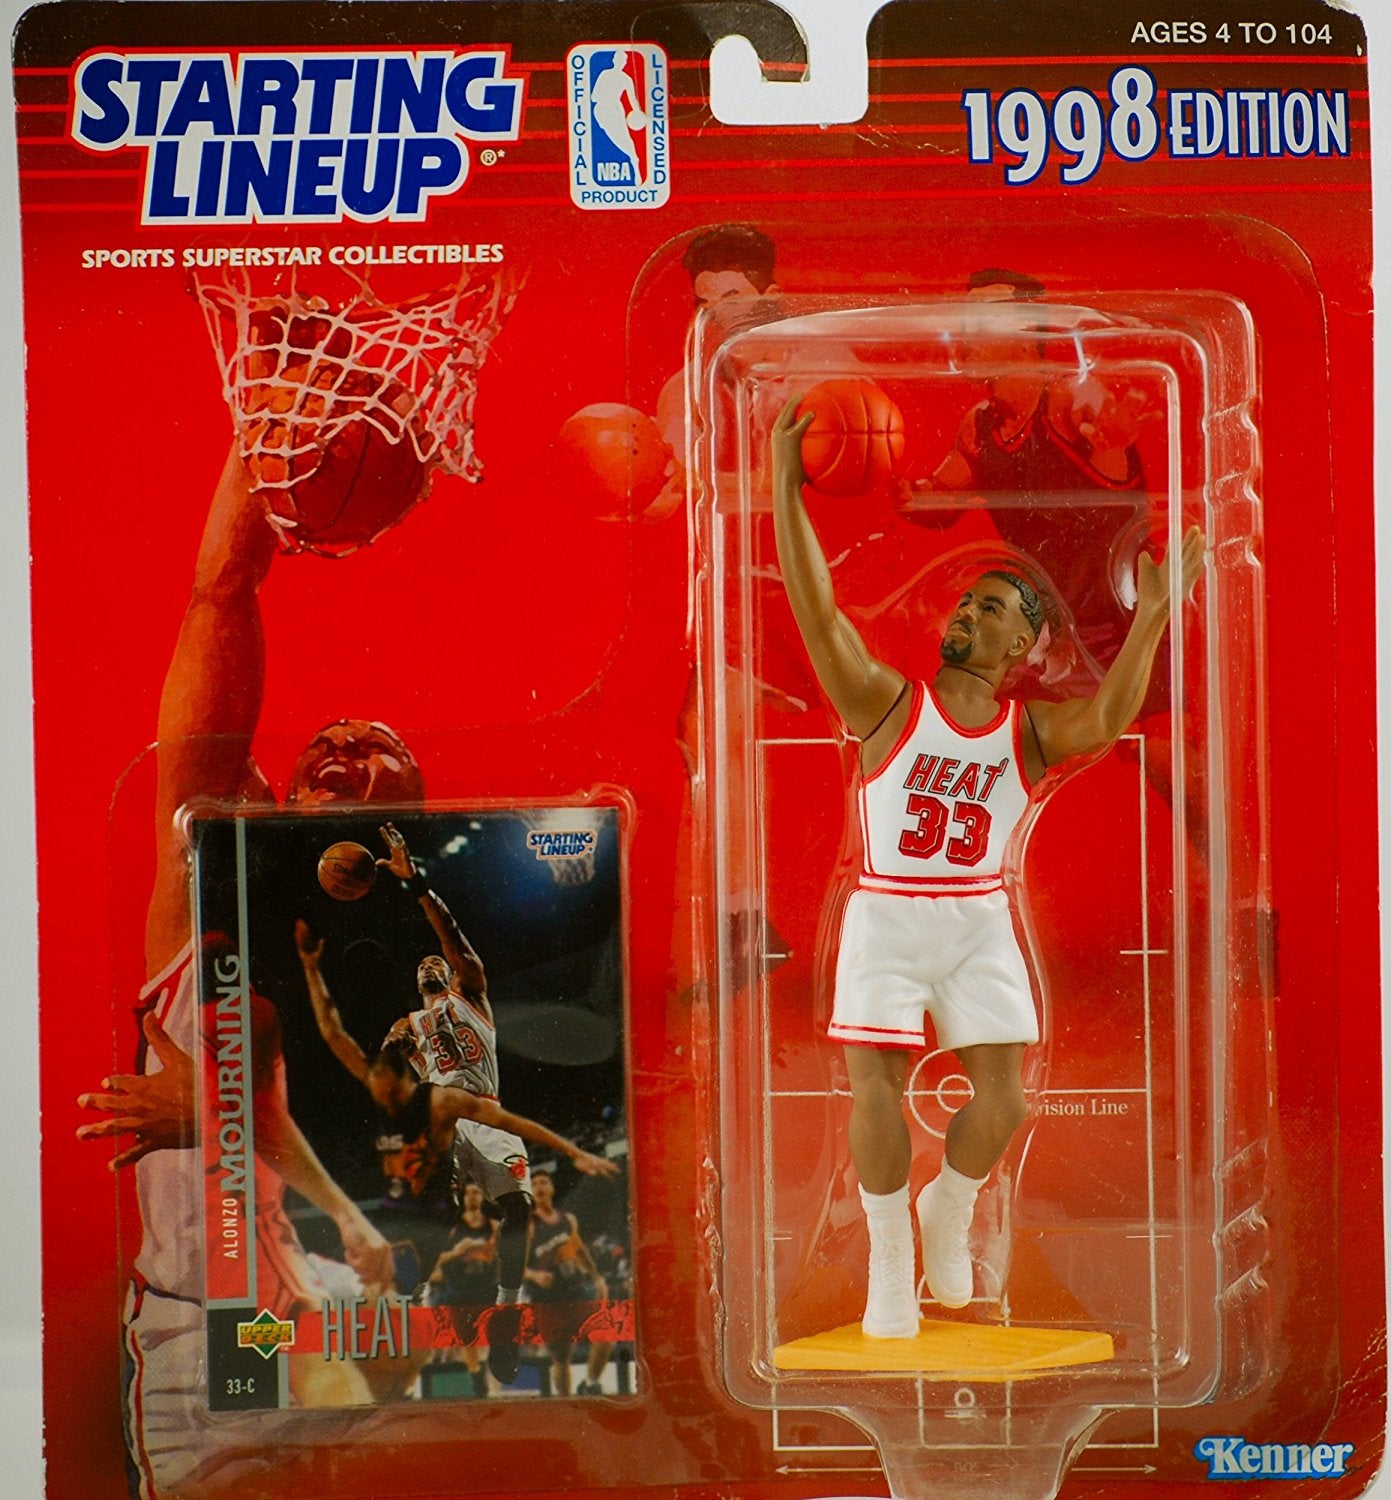 ALONZO MOURNING / MIAMI HEAT 1998 NBA Starting Lineup Action Figure & Exclusive NBA Collector Trading Card